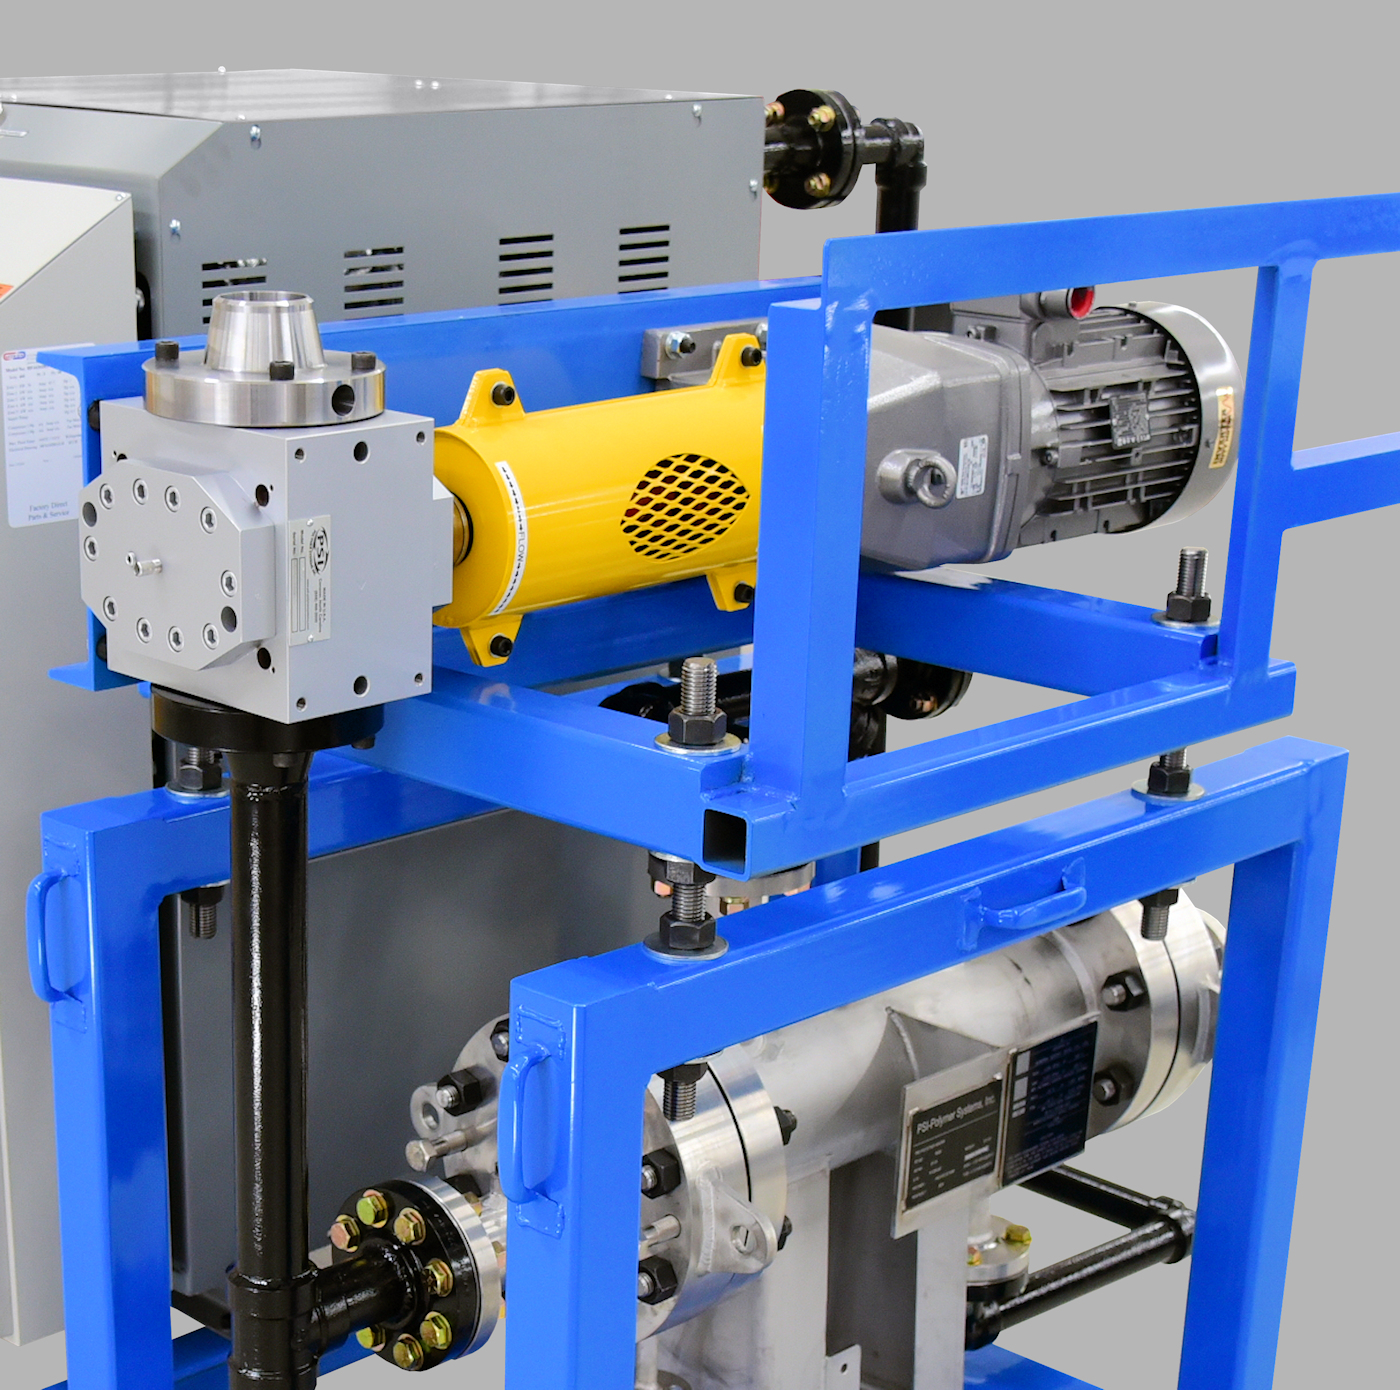 Extrusion Chemical Industrial Gear Pump (CIP)